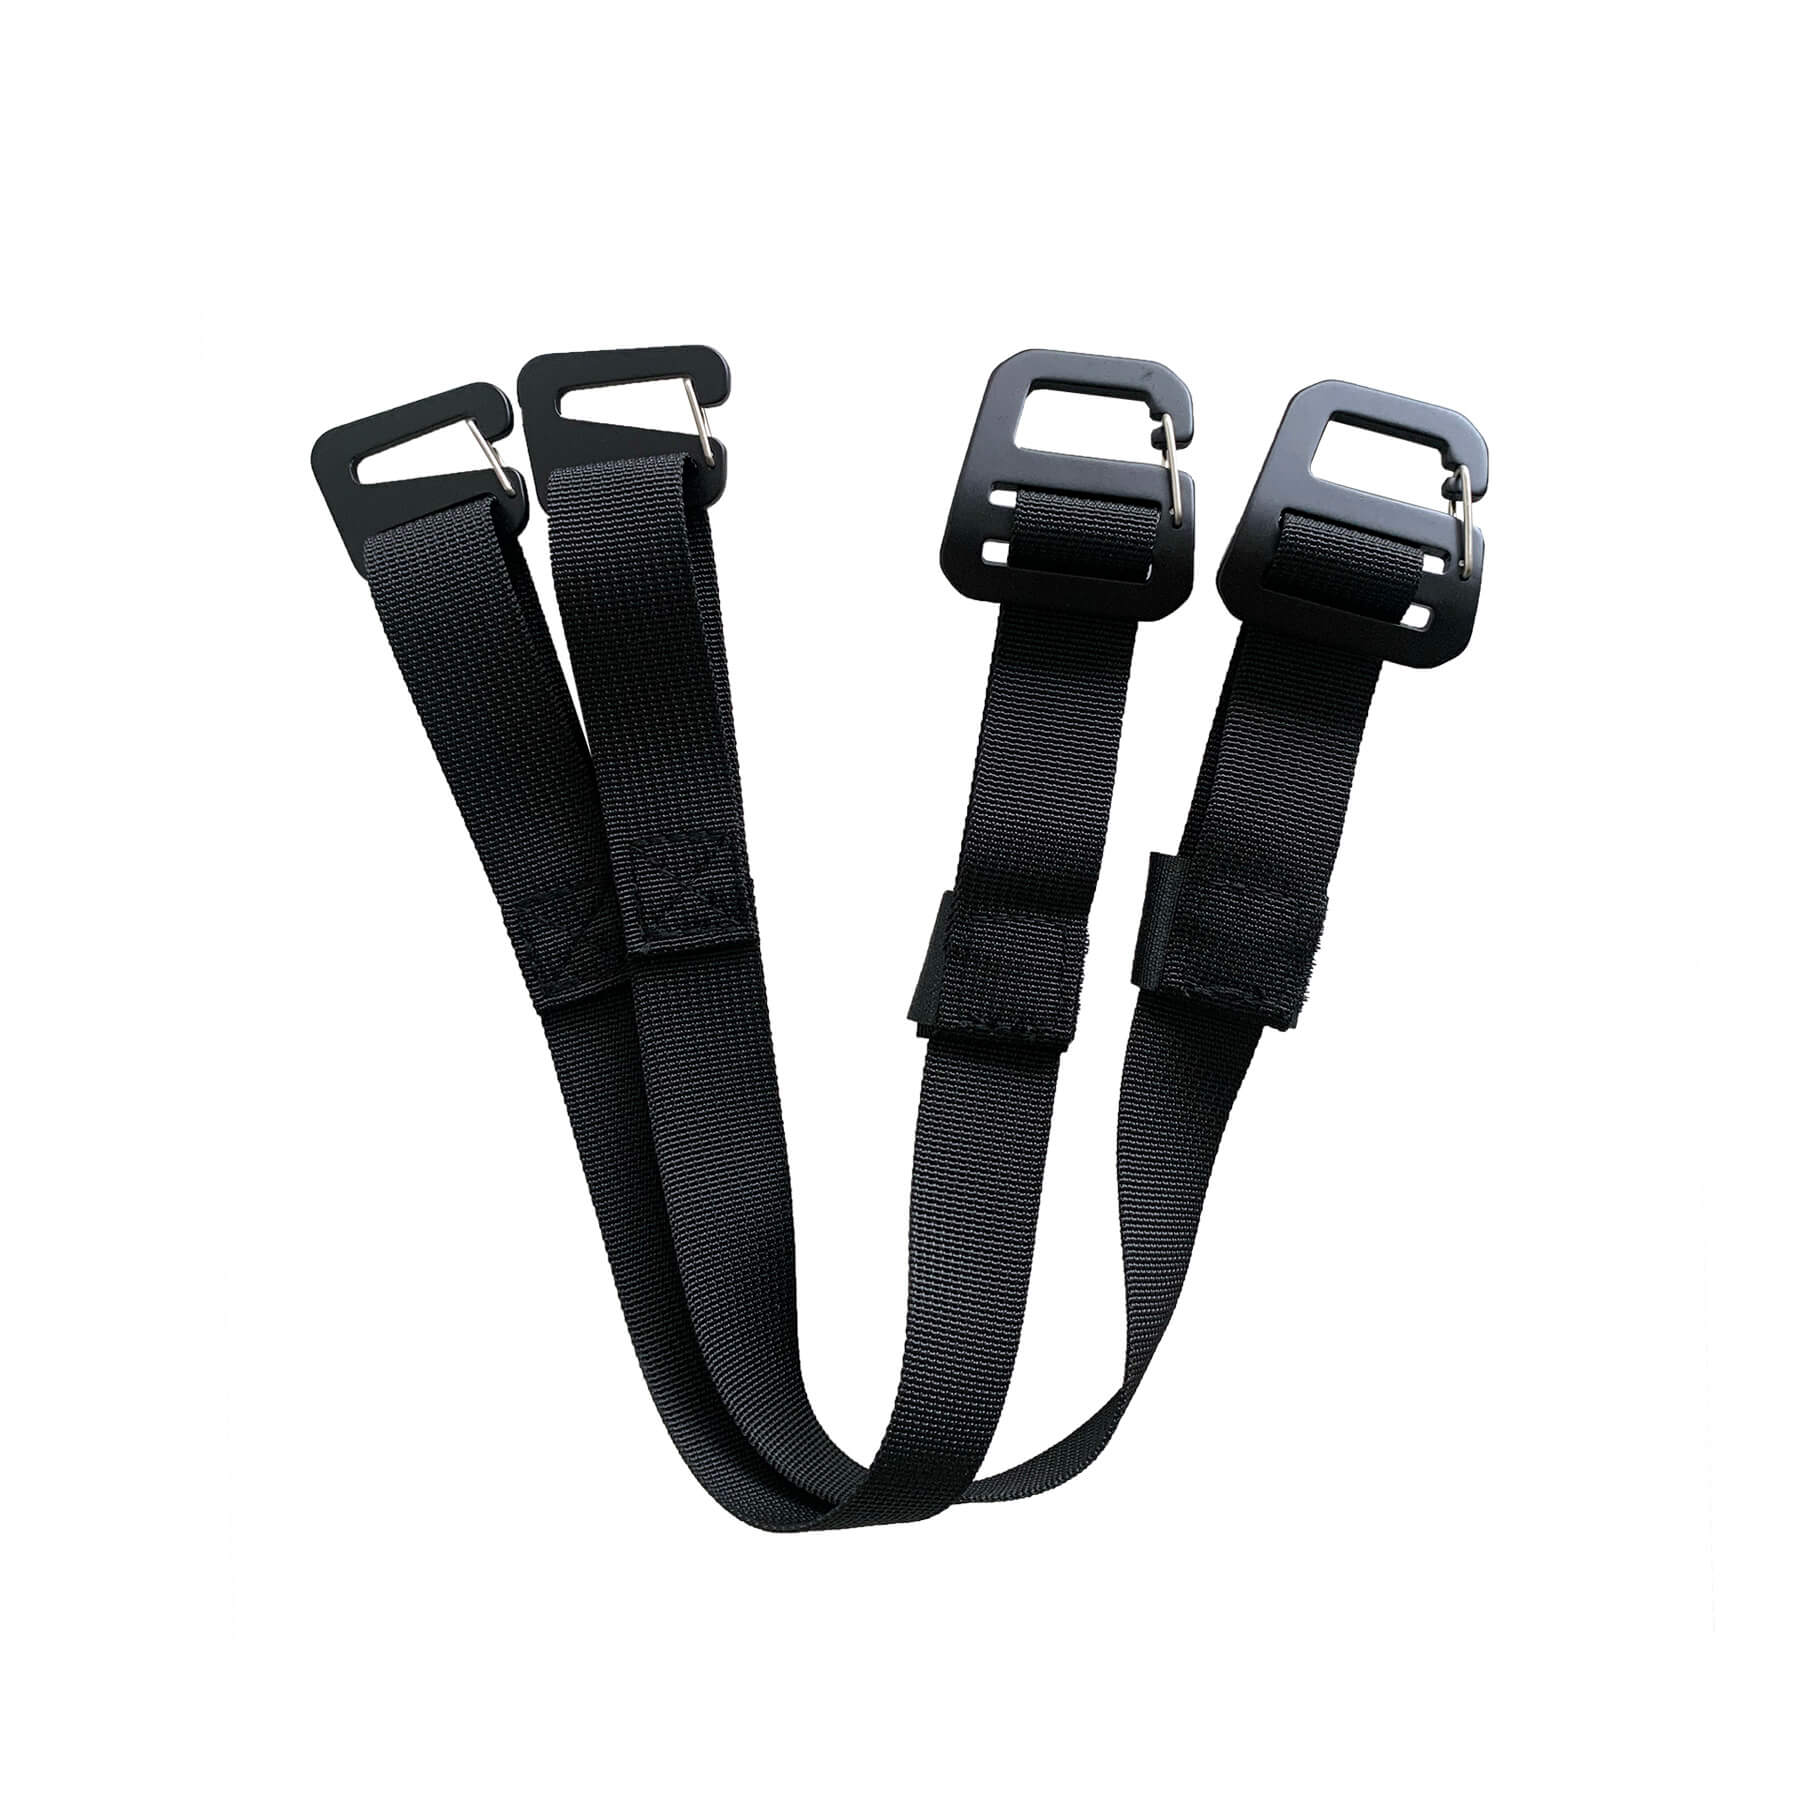 Piggyback Straps for TULLY Tailbag - Flying Solo Gear Company